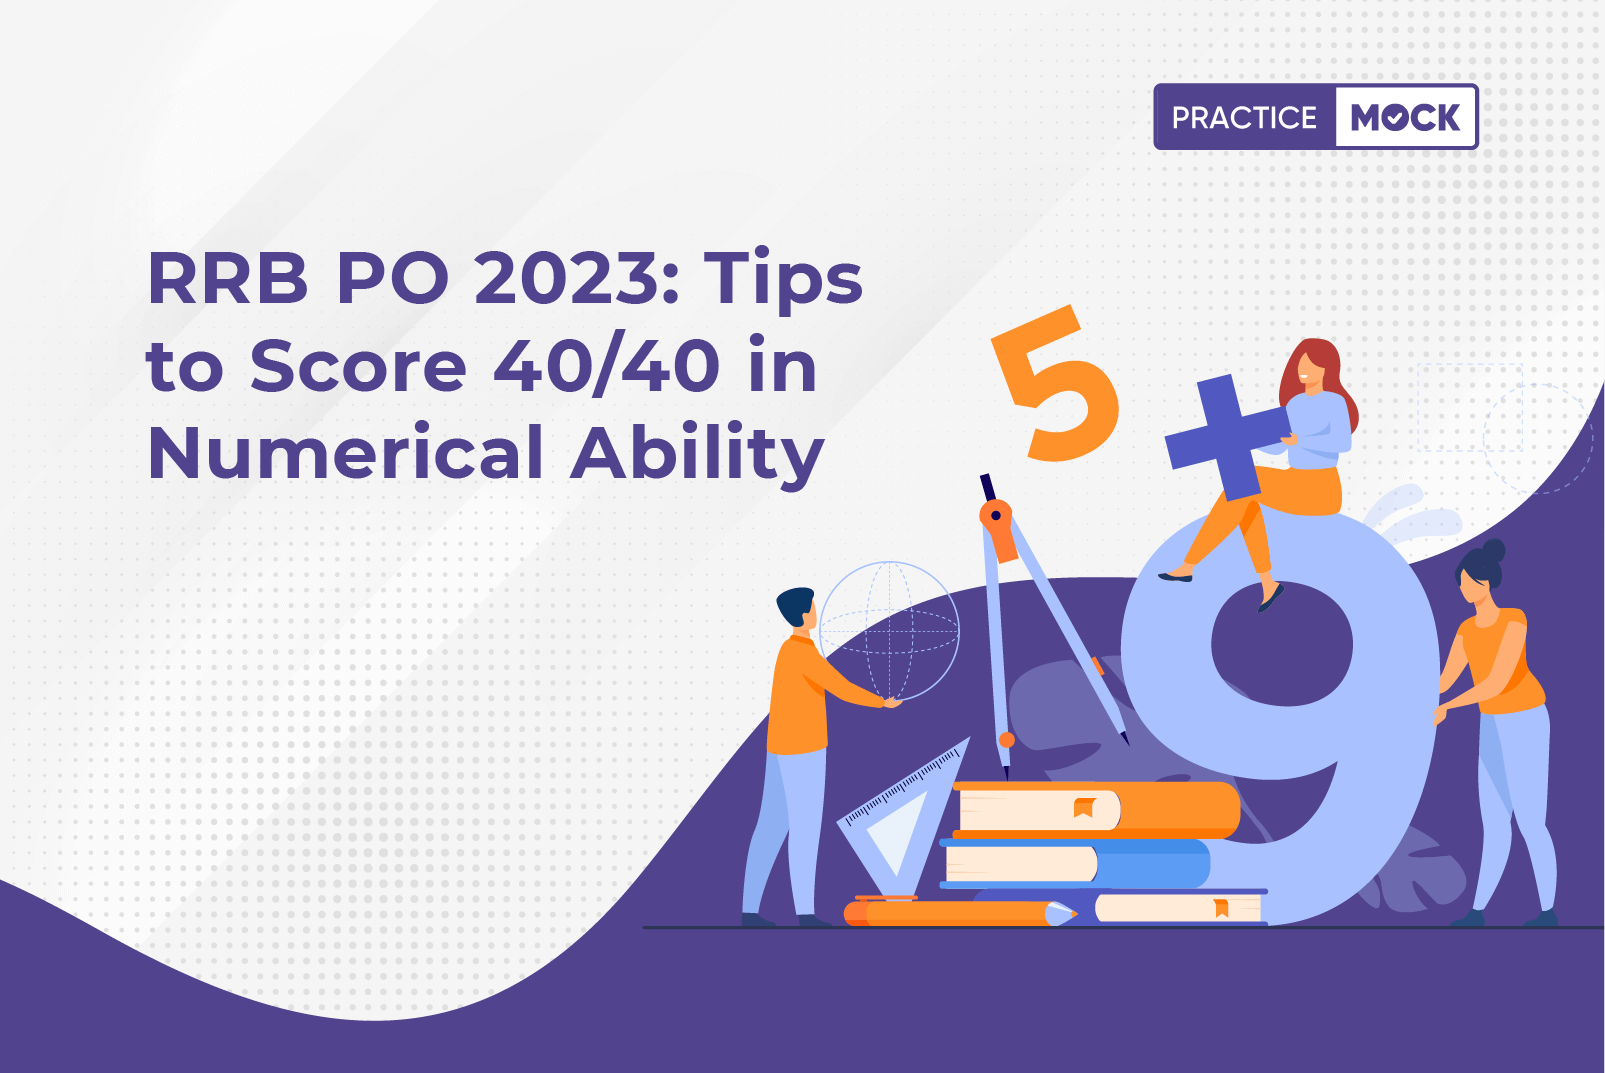 RRB-PO-2023-Tips-to-Score-4040-in-Numerical-Ability